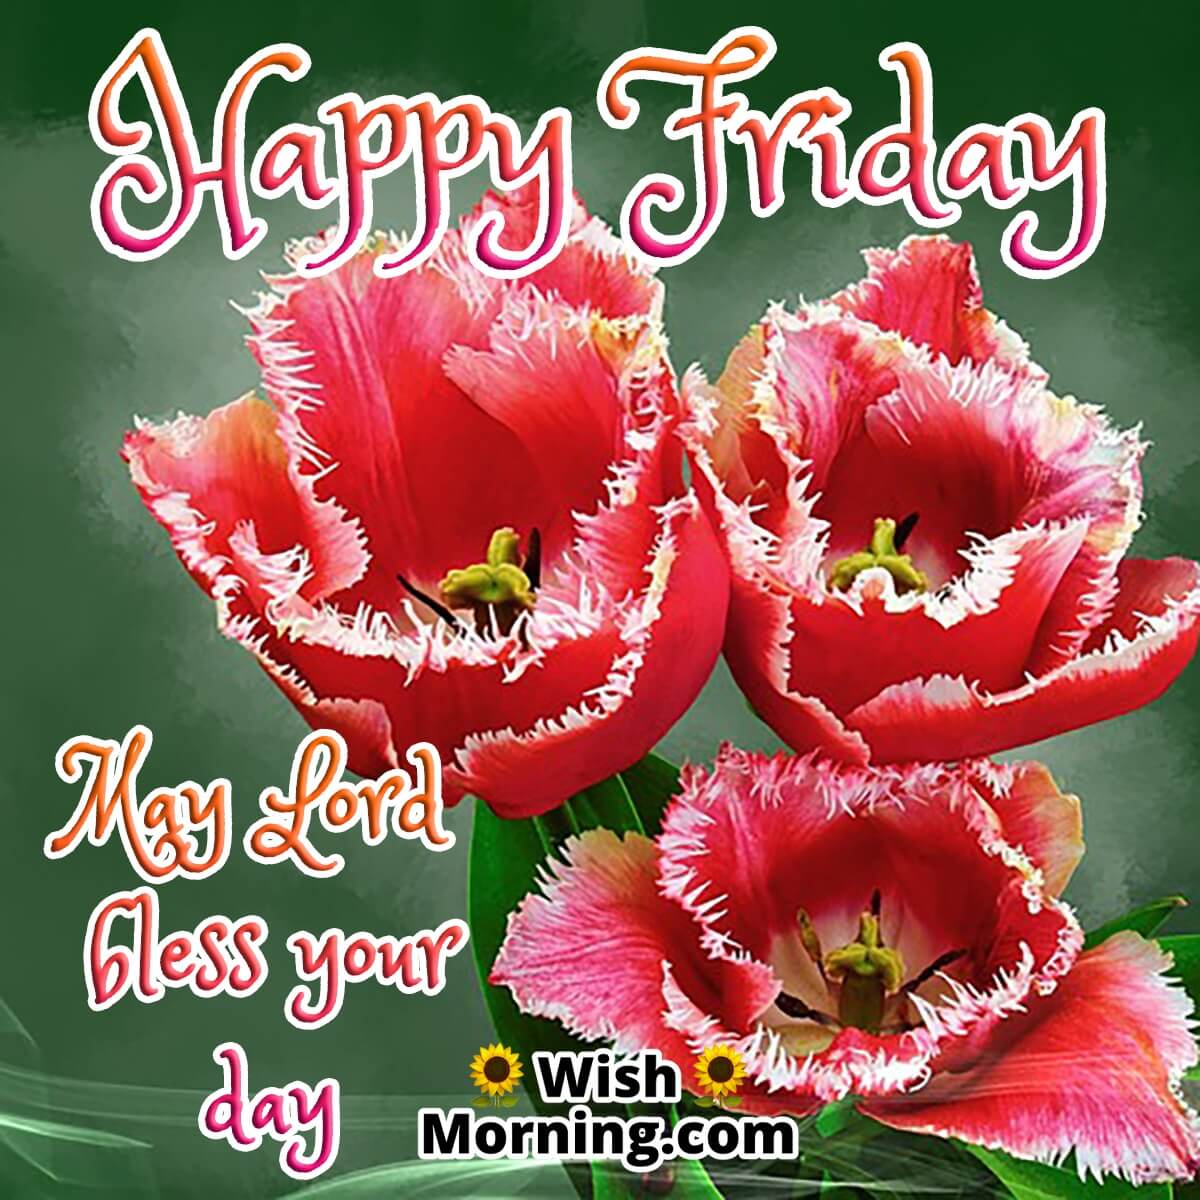 Happy Friday Lord Bless Your Day